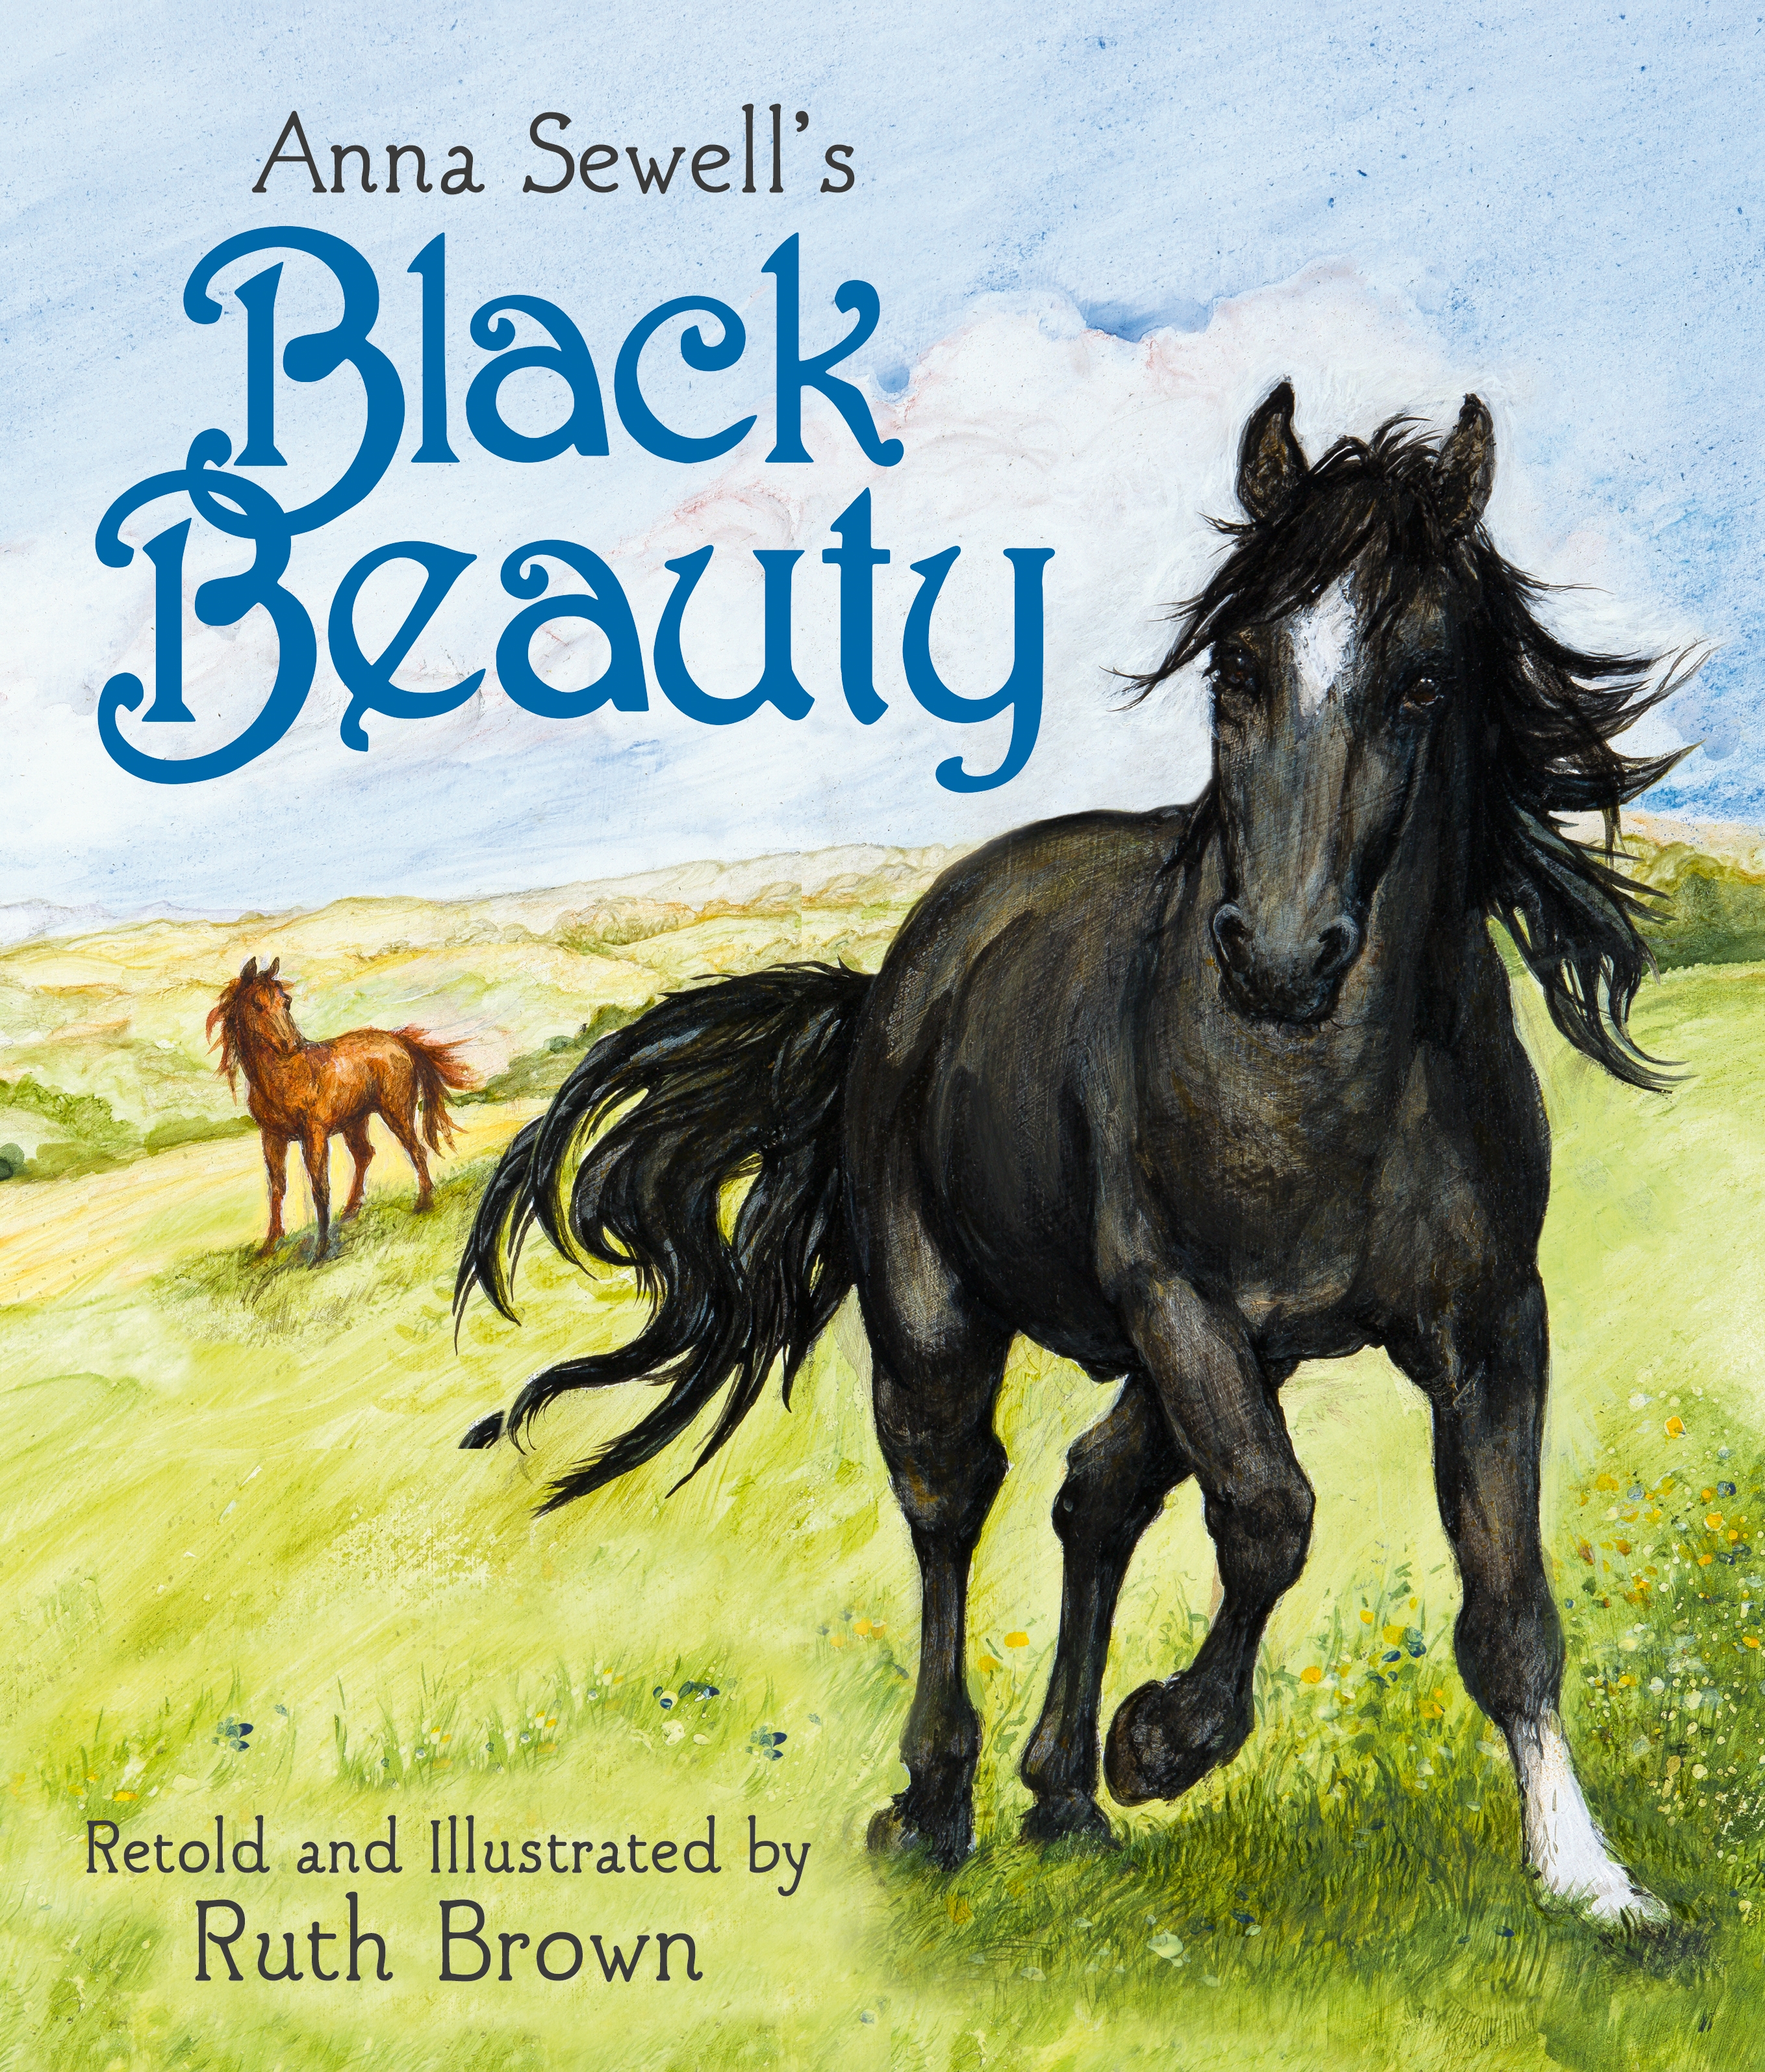 Black Beauty (Picture Book) by Anna Sewell - Penguin Books Australia